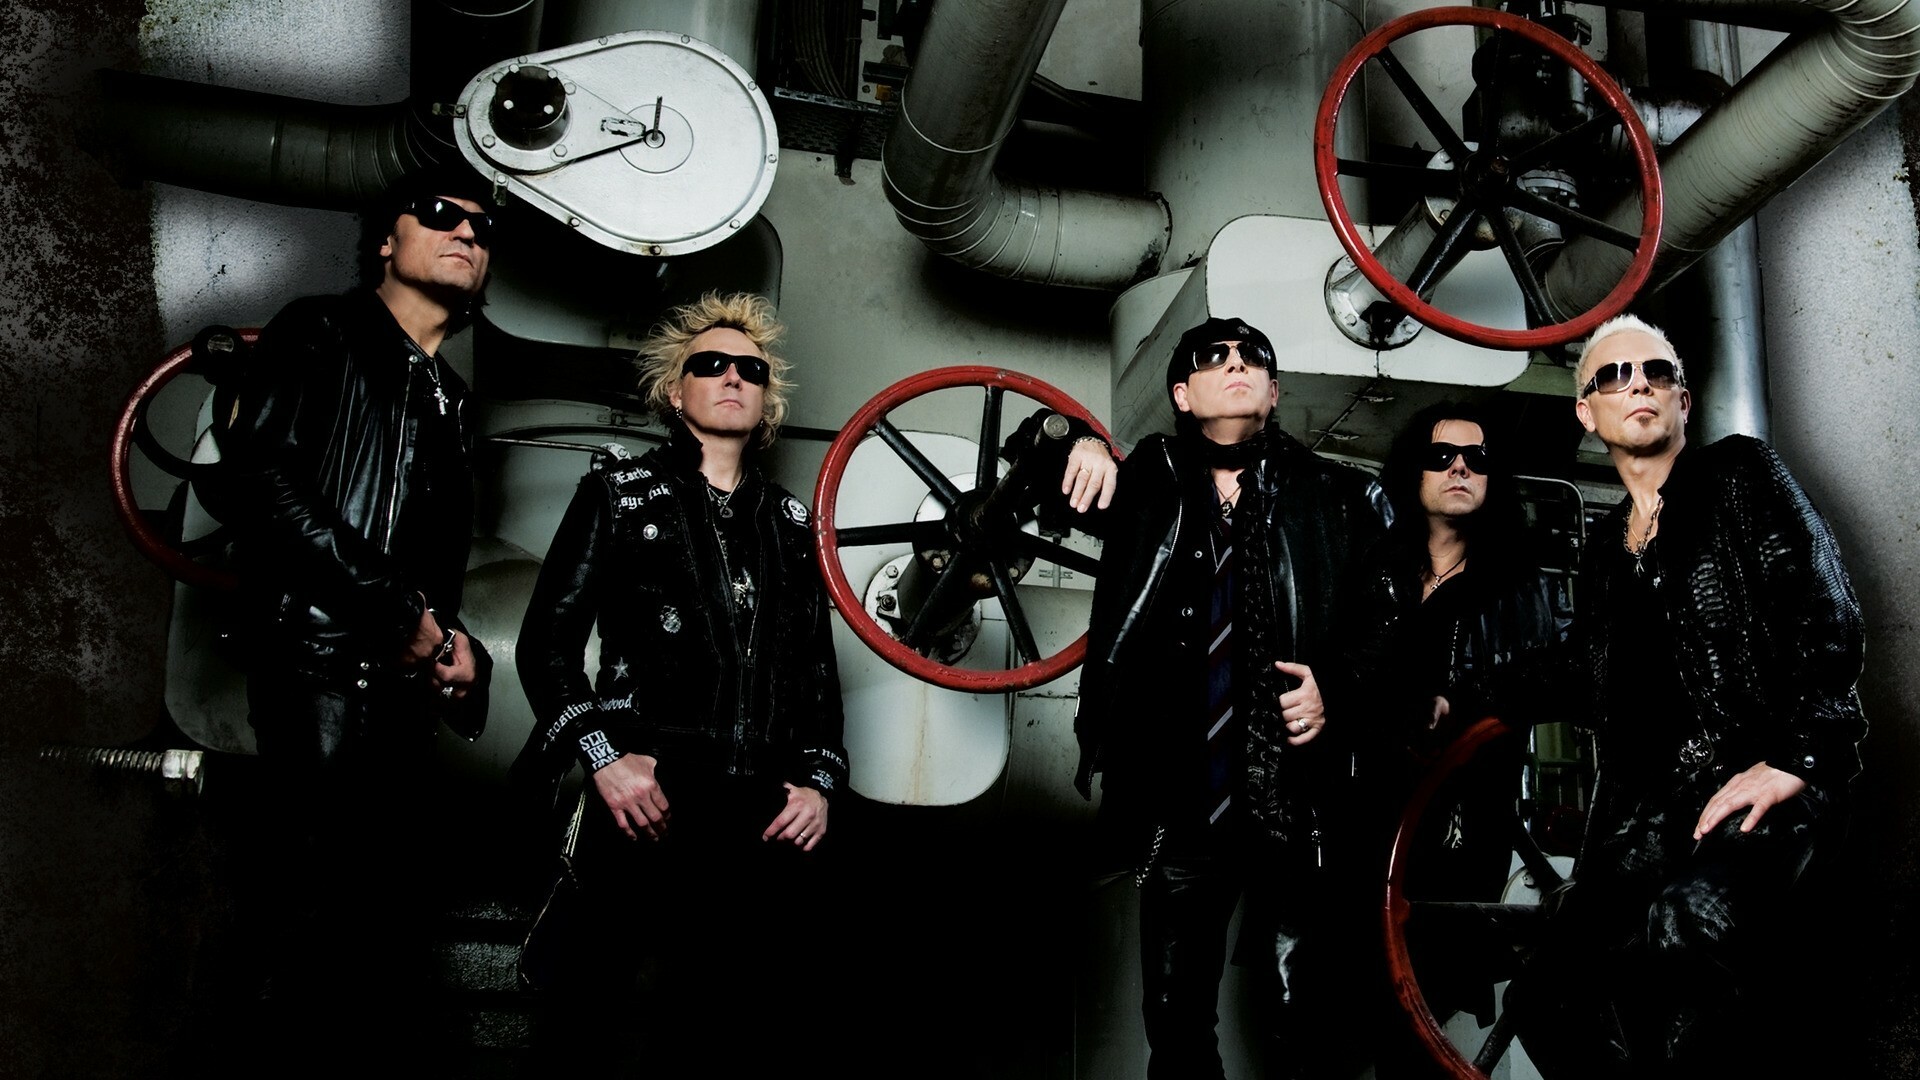 Scorpions: German hard rock band from Hannover. 1920x1080 Full HD Wallpaper.